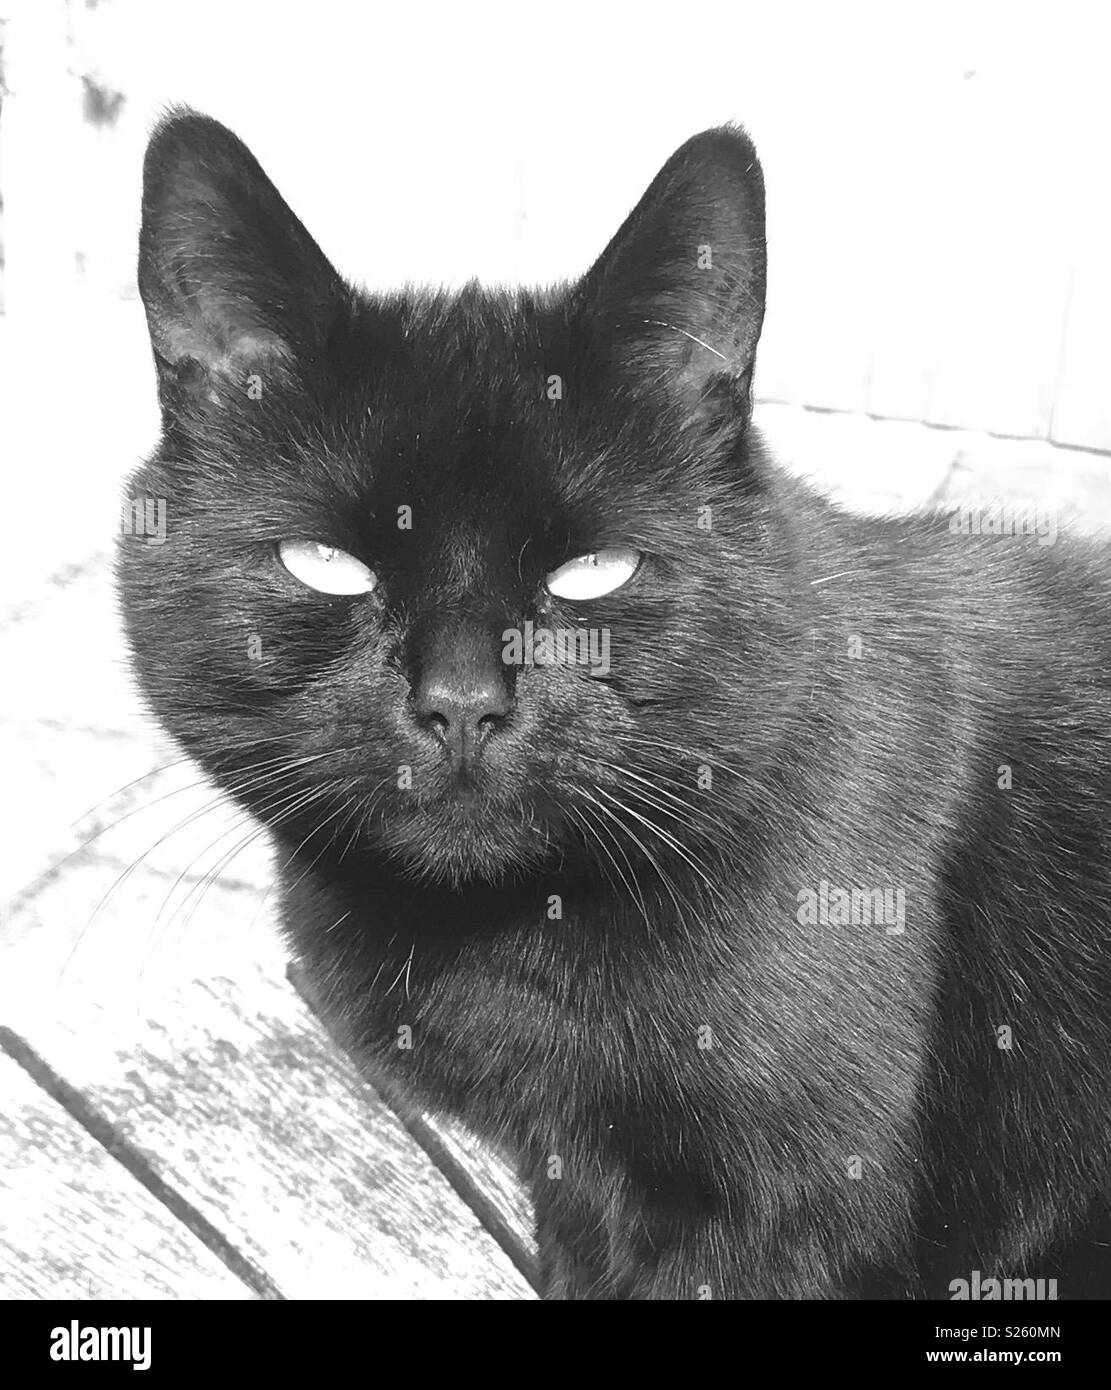 Black cat Black and White Stock Photos & Images - Alamy